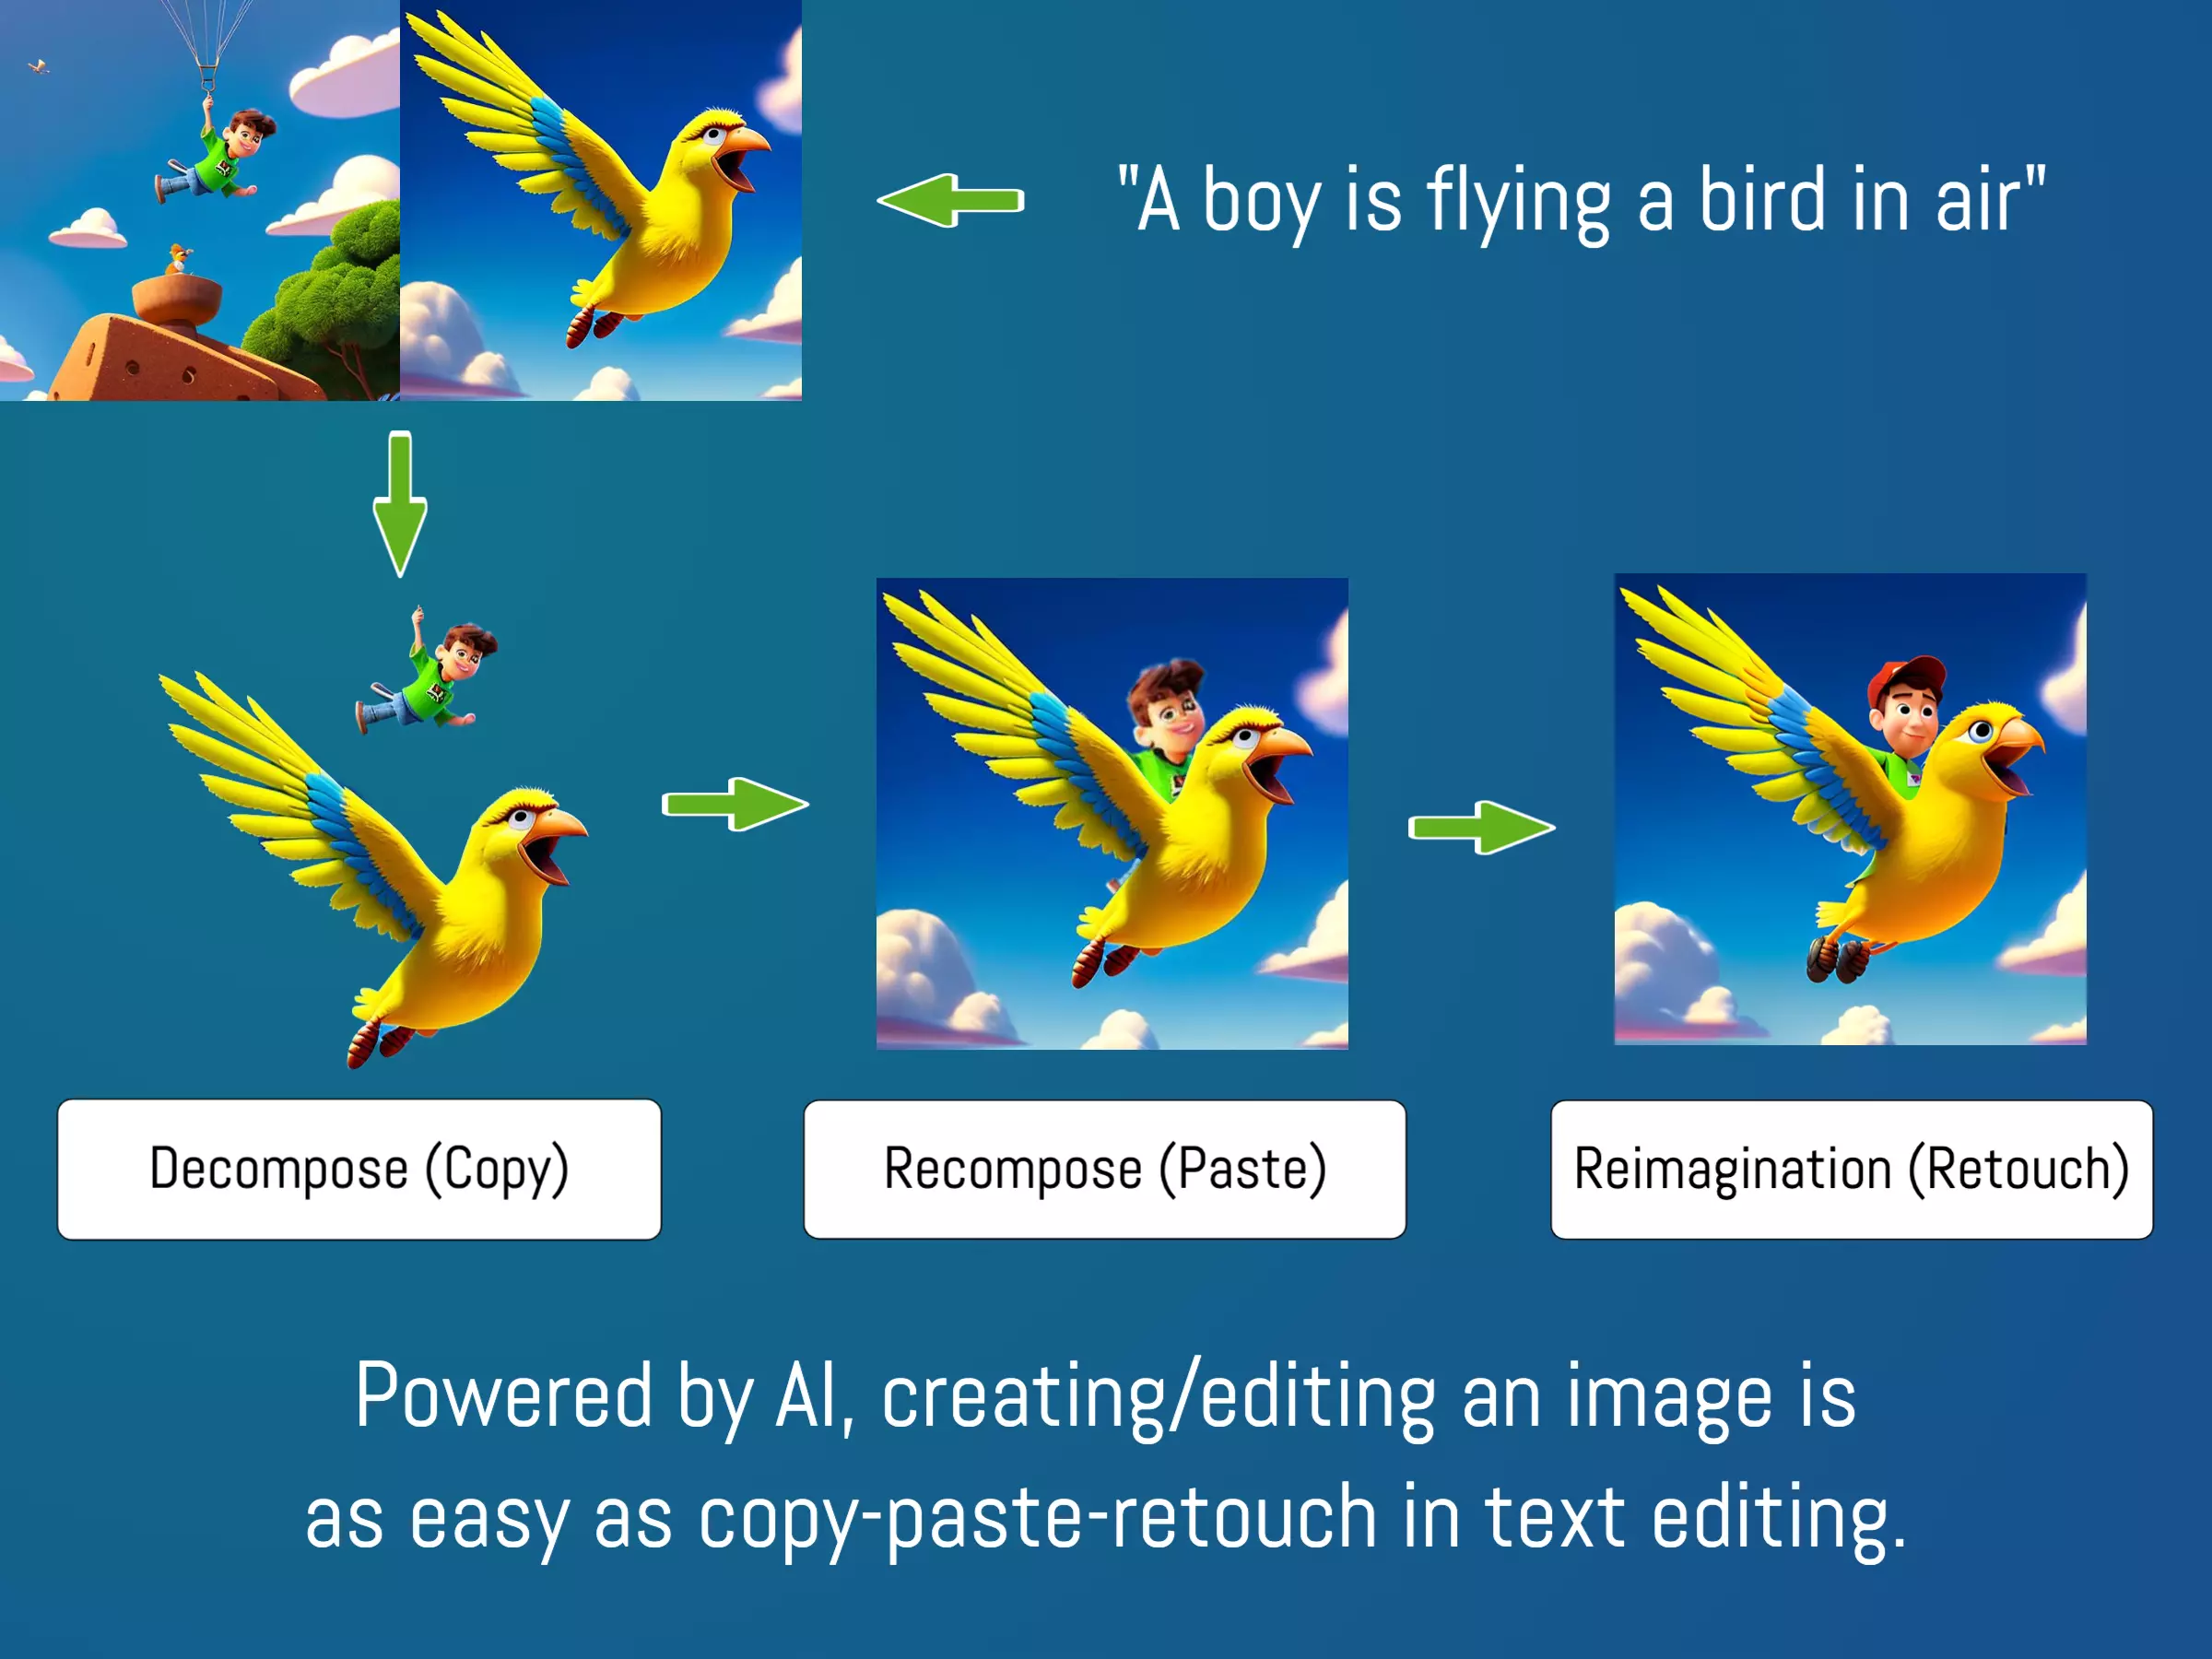 graphic design is as easy as text editing, by decompose-recompose-reimagine workflow